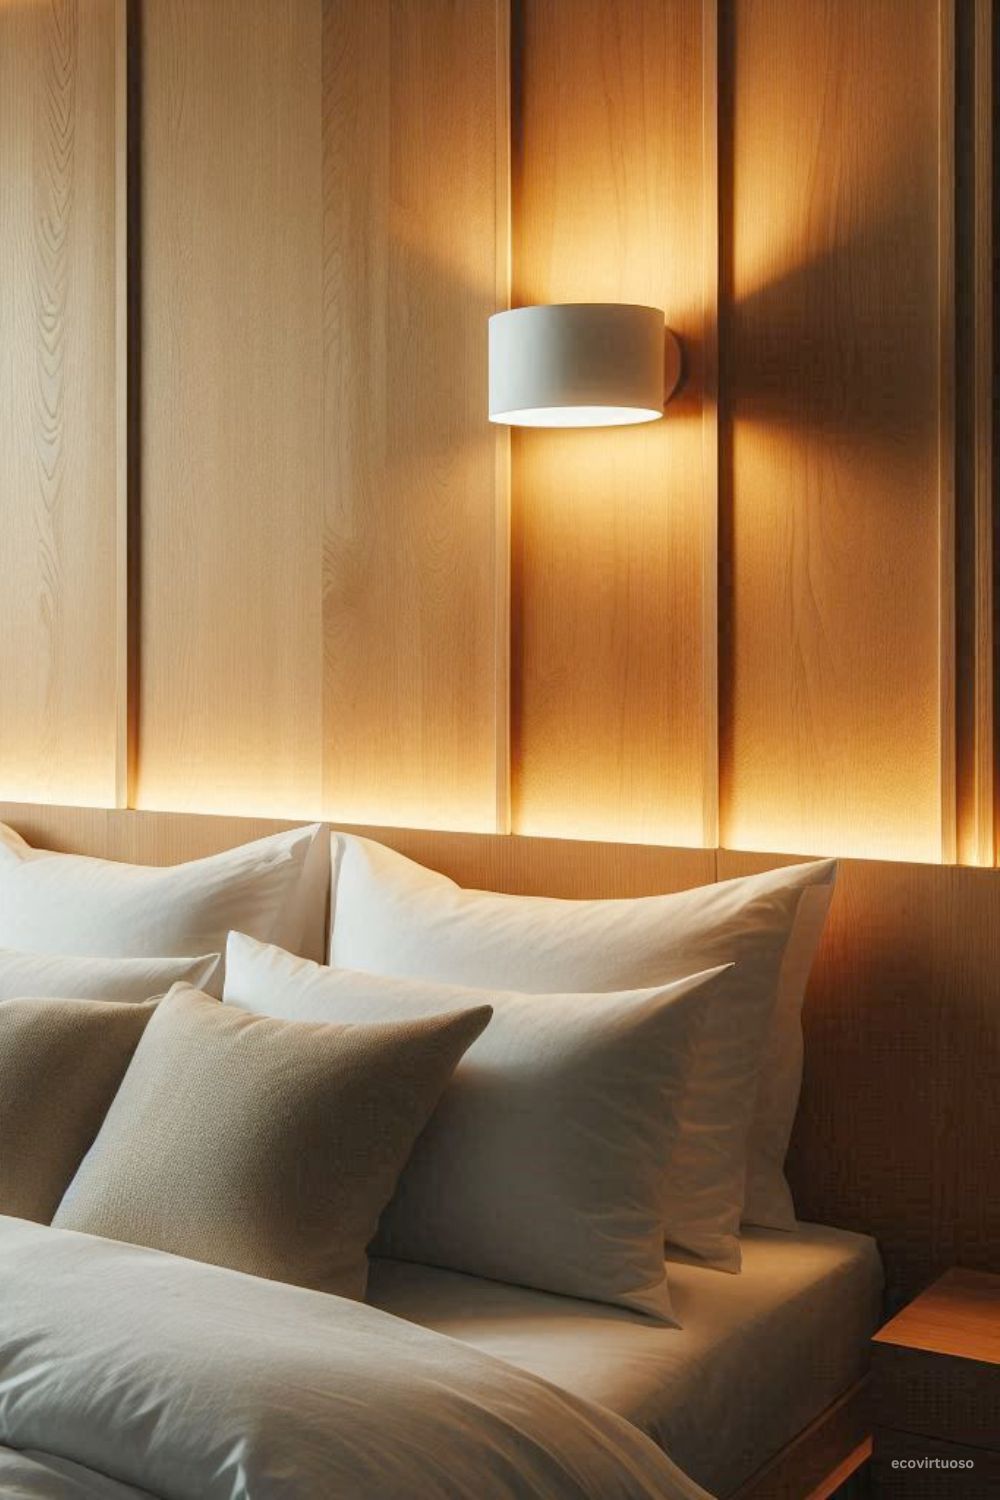 wall-mounted light over the bed